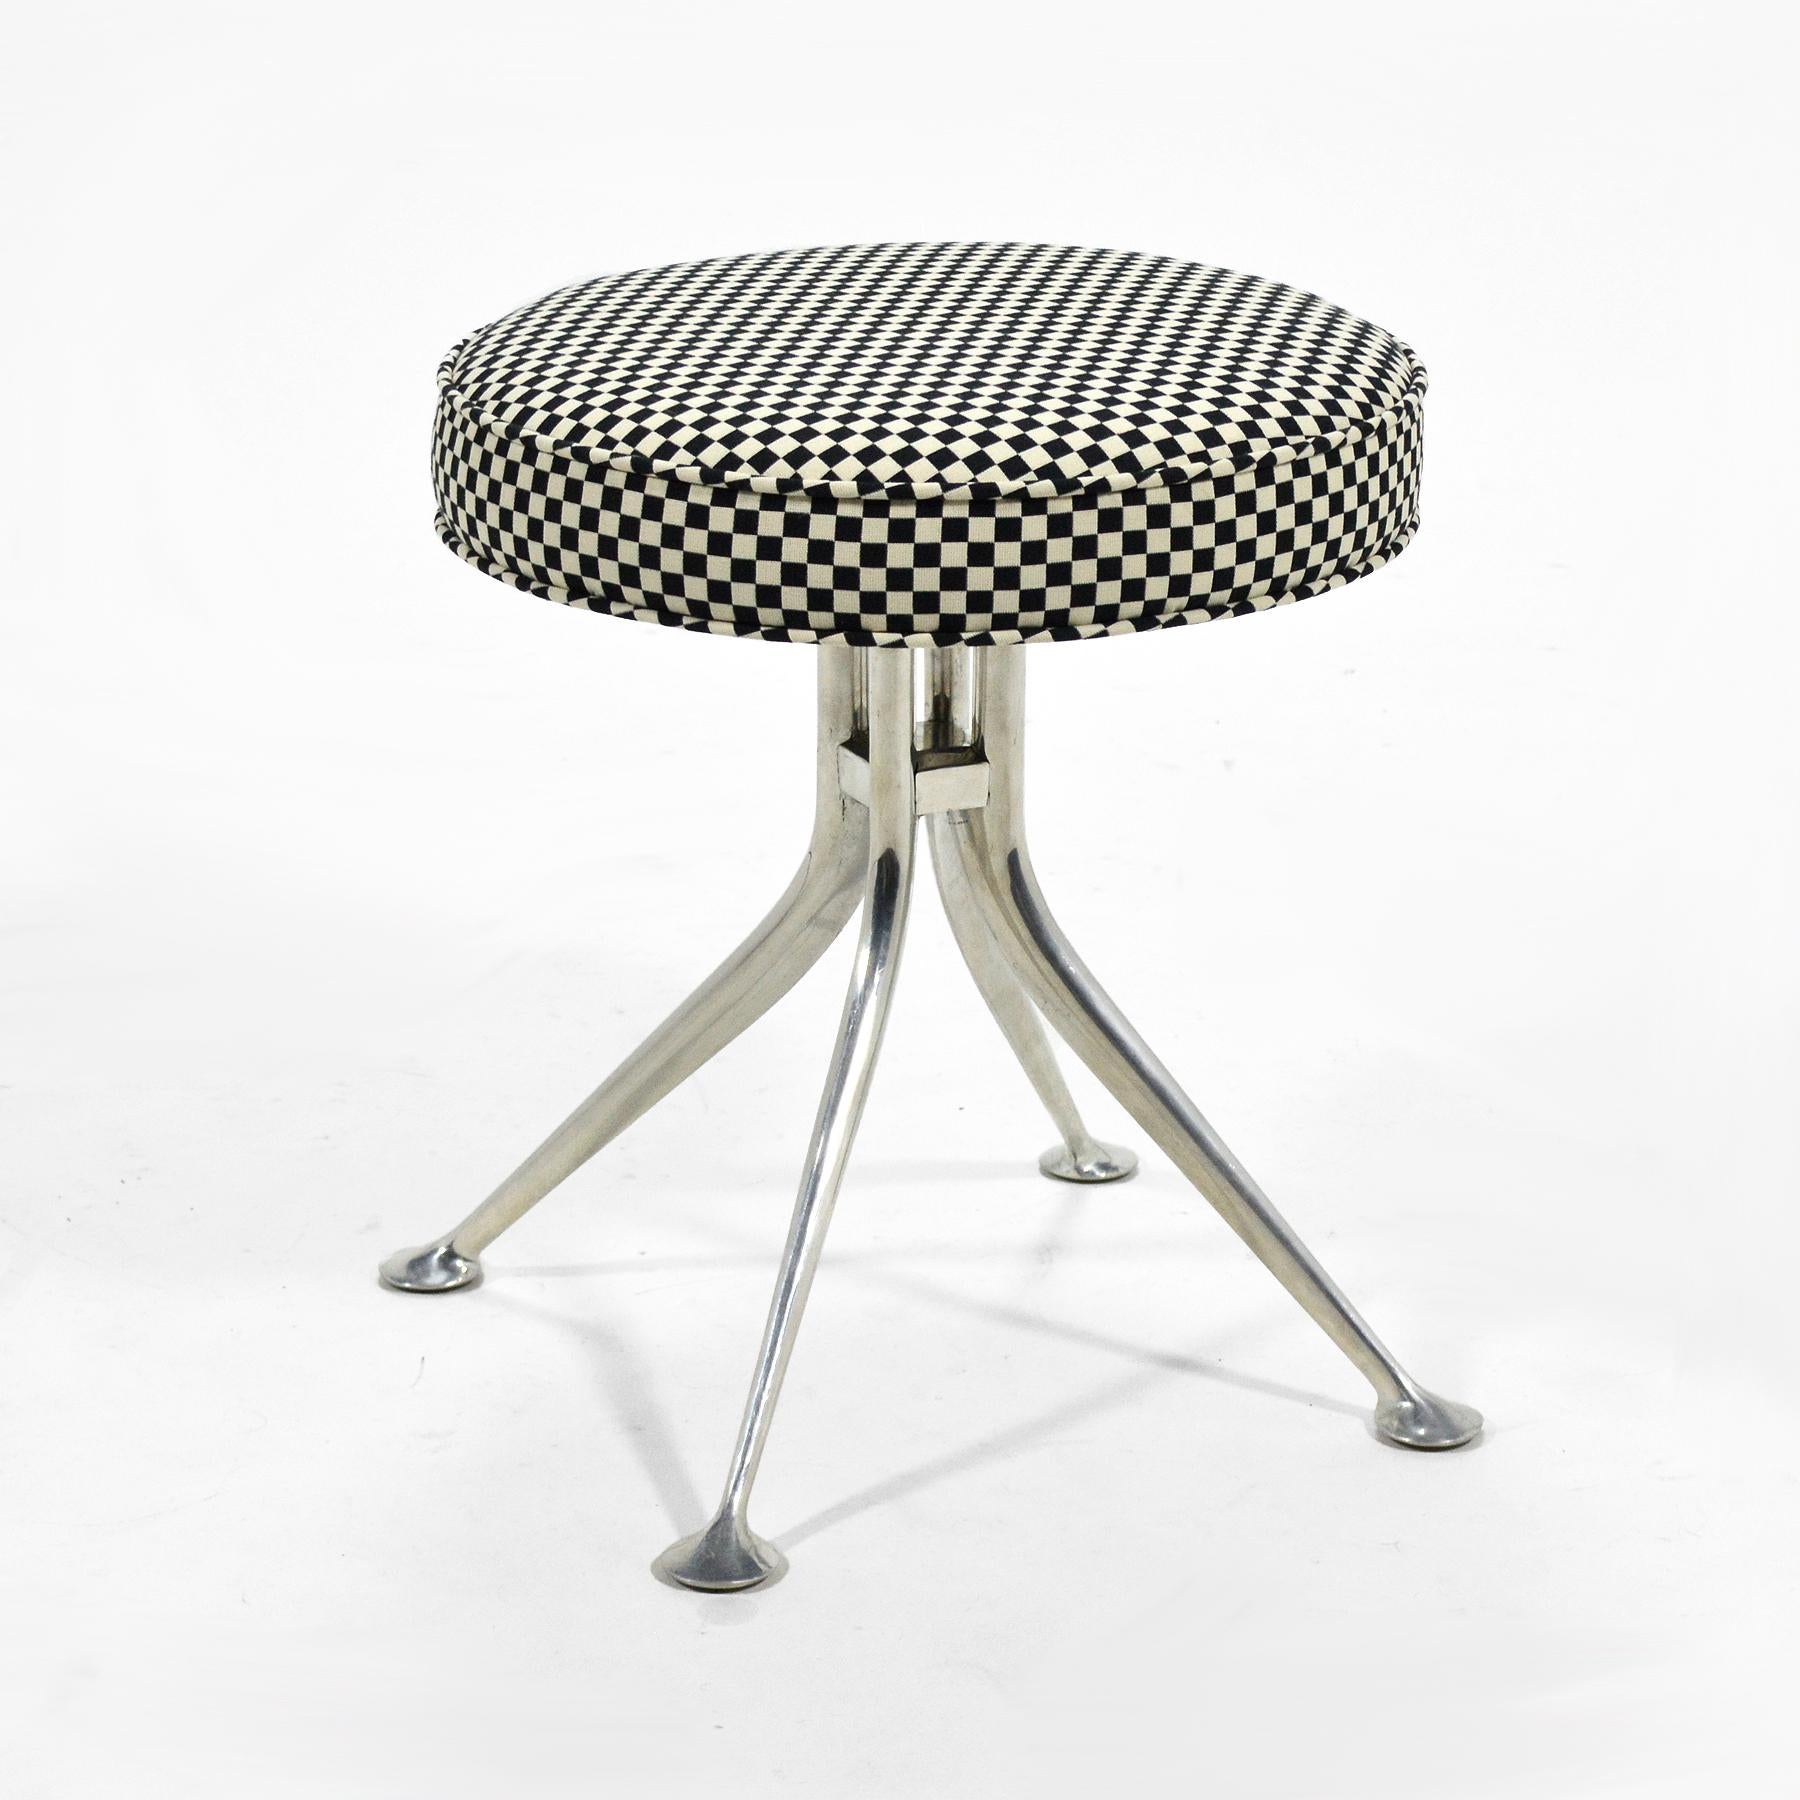 Produced by Herman Miller for just a year, the Alexander Girard group was originally developed for Braniff Airlines. The designs are quintessentially Girard– with a playful sensibility and an innovative eye.

 This wonderful stool features a cast